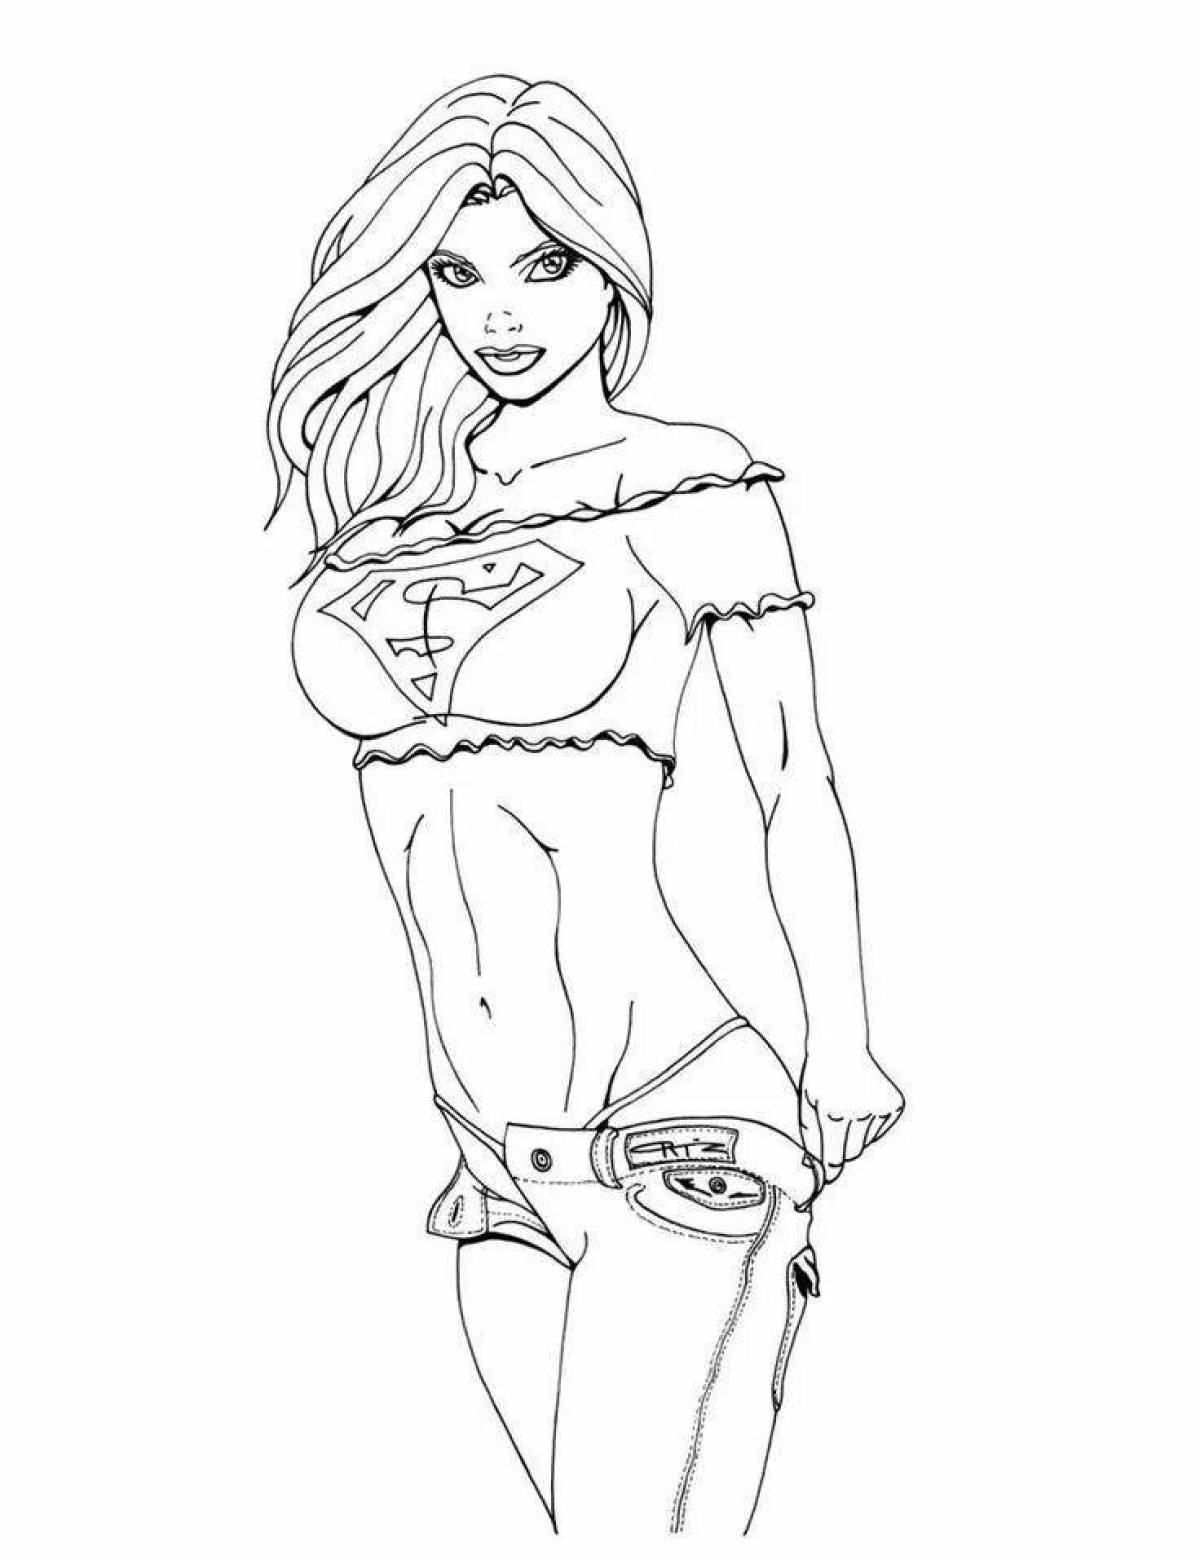 Exciting nude girls coloring pages